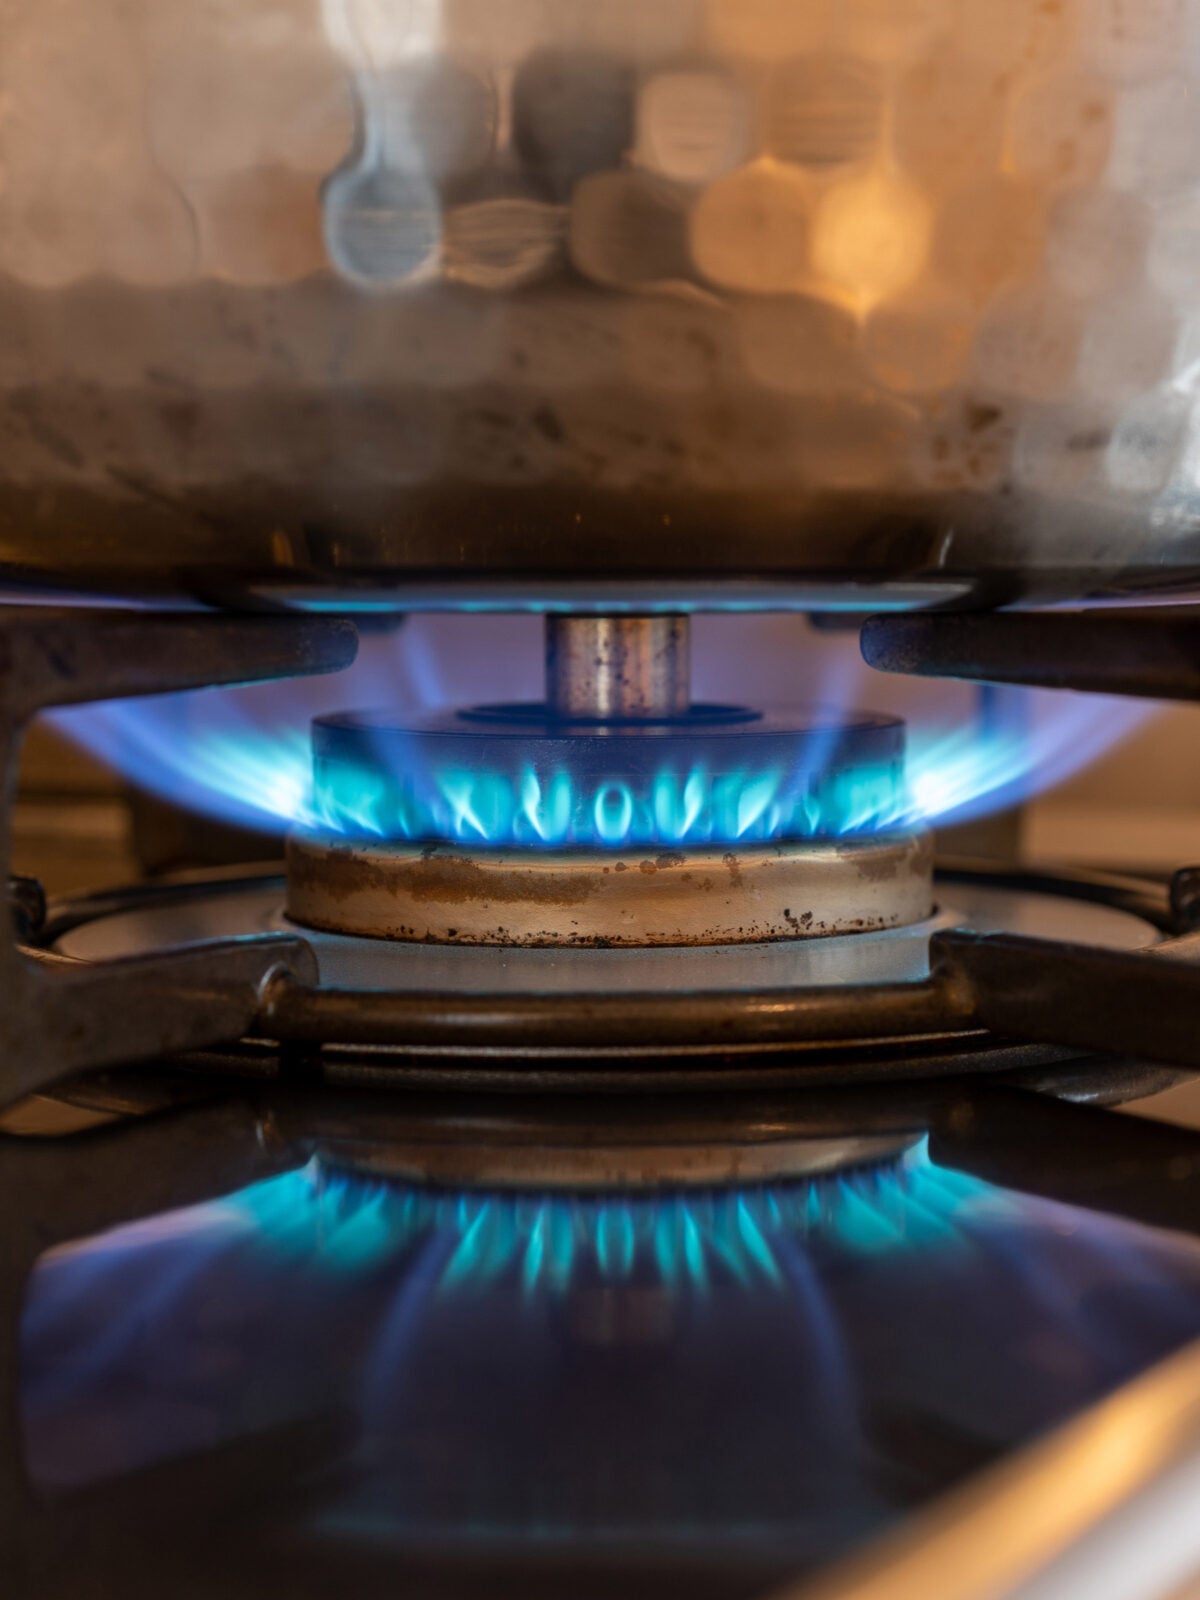 A textured pot sits upon a blue gas flame on a stove top.